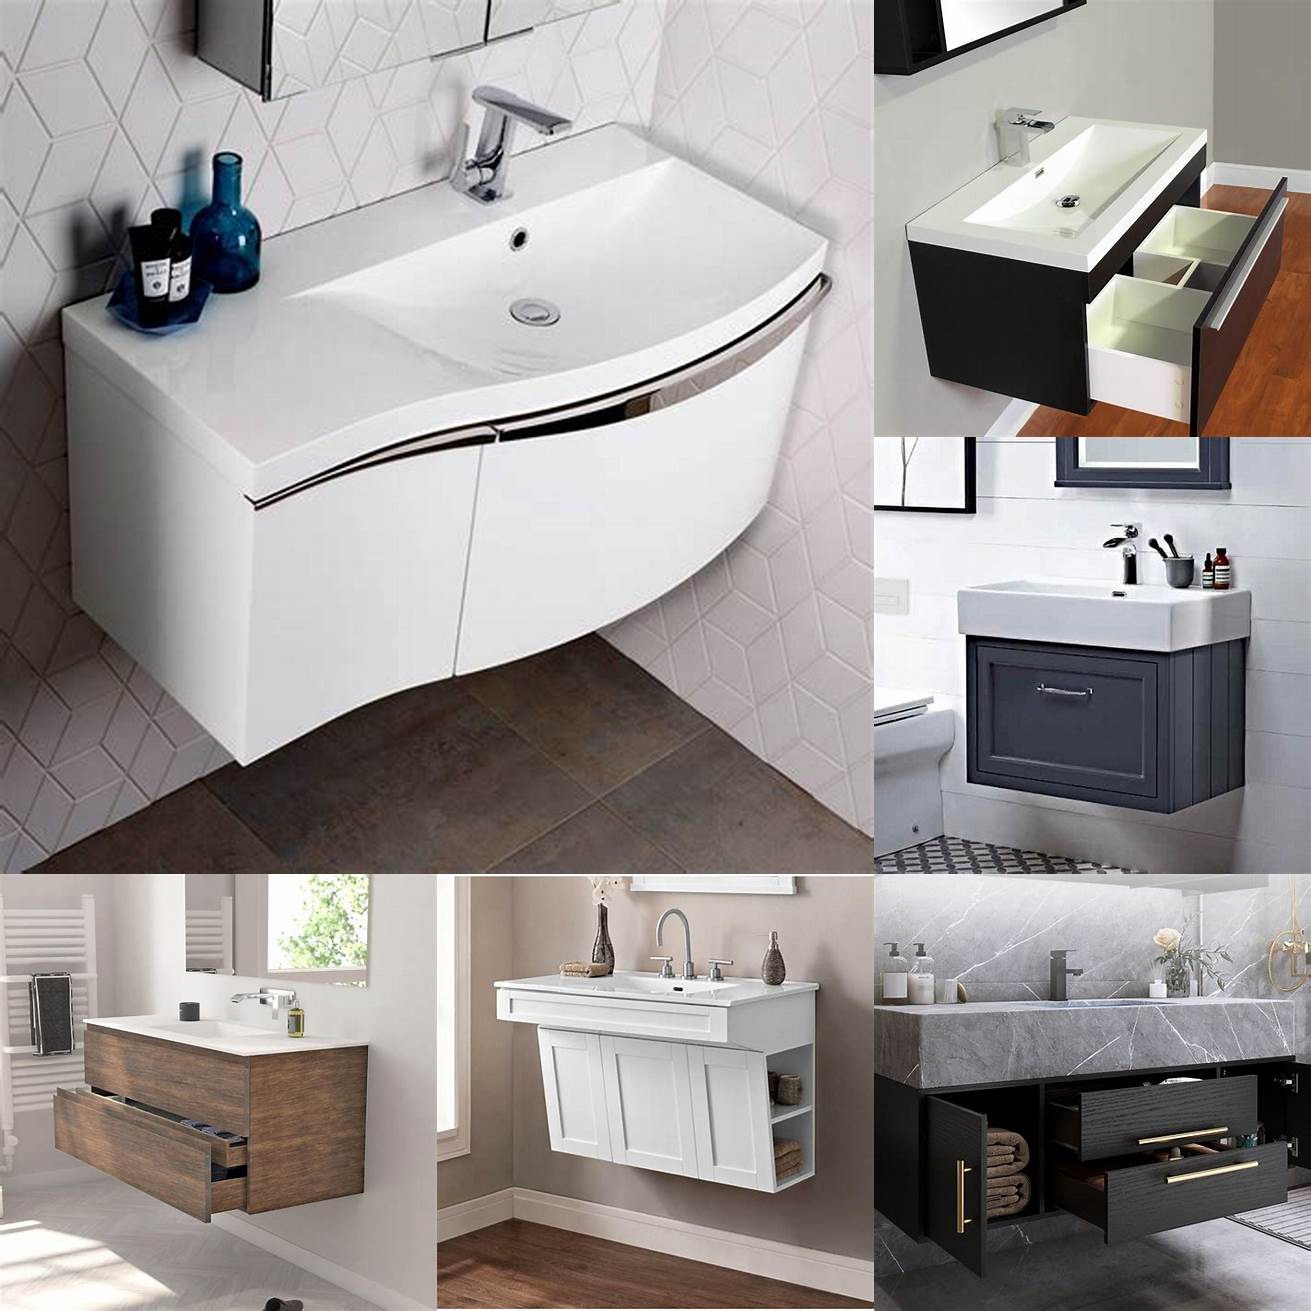 Image 4 A space-saving wall mounted vanity with a narrow rectangular shape